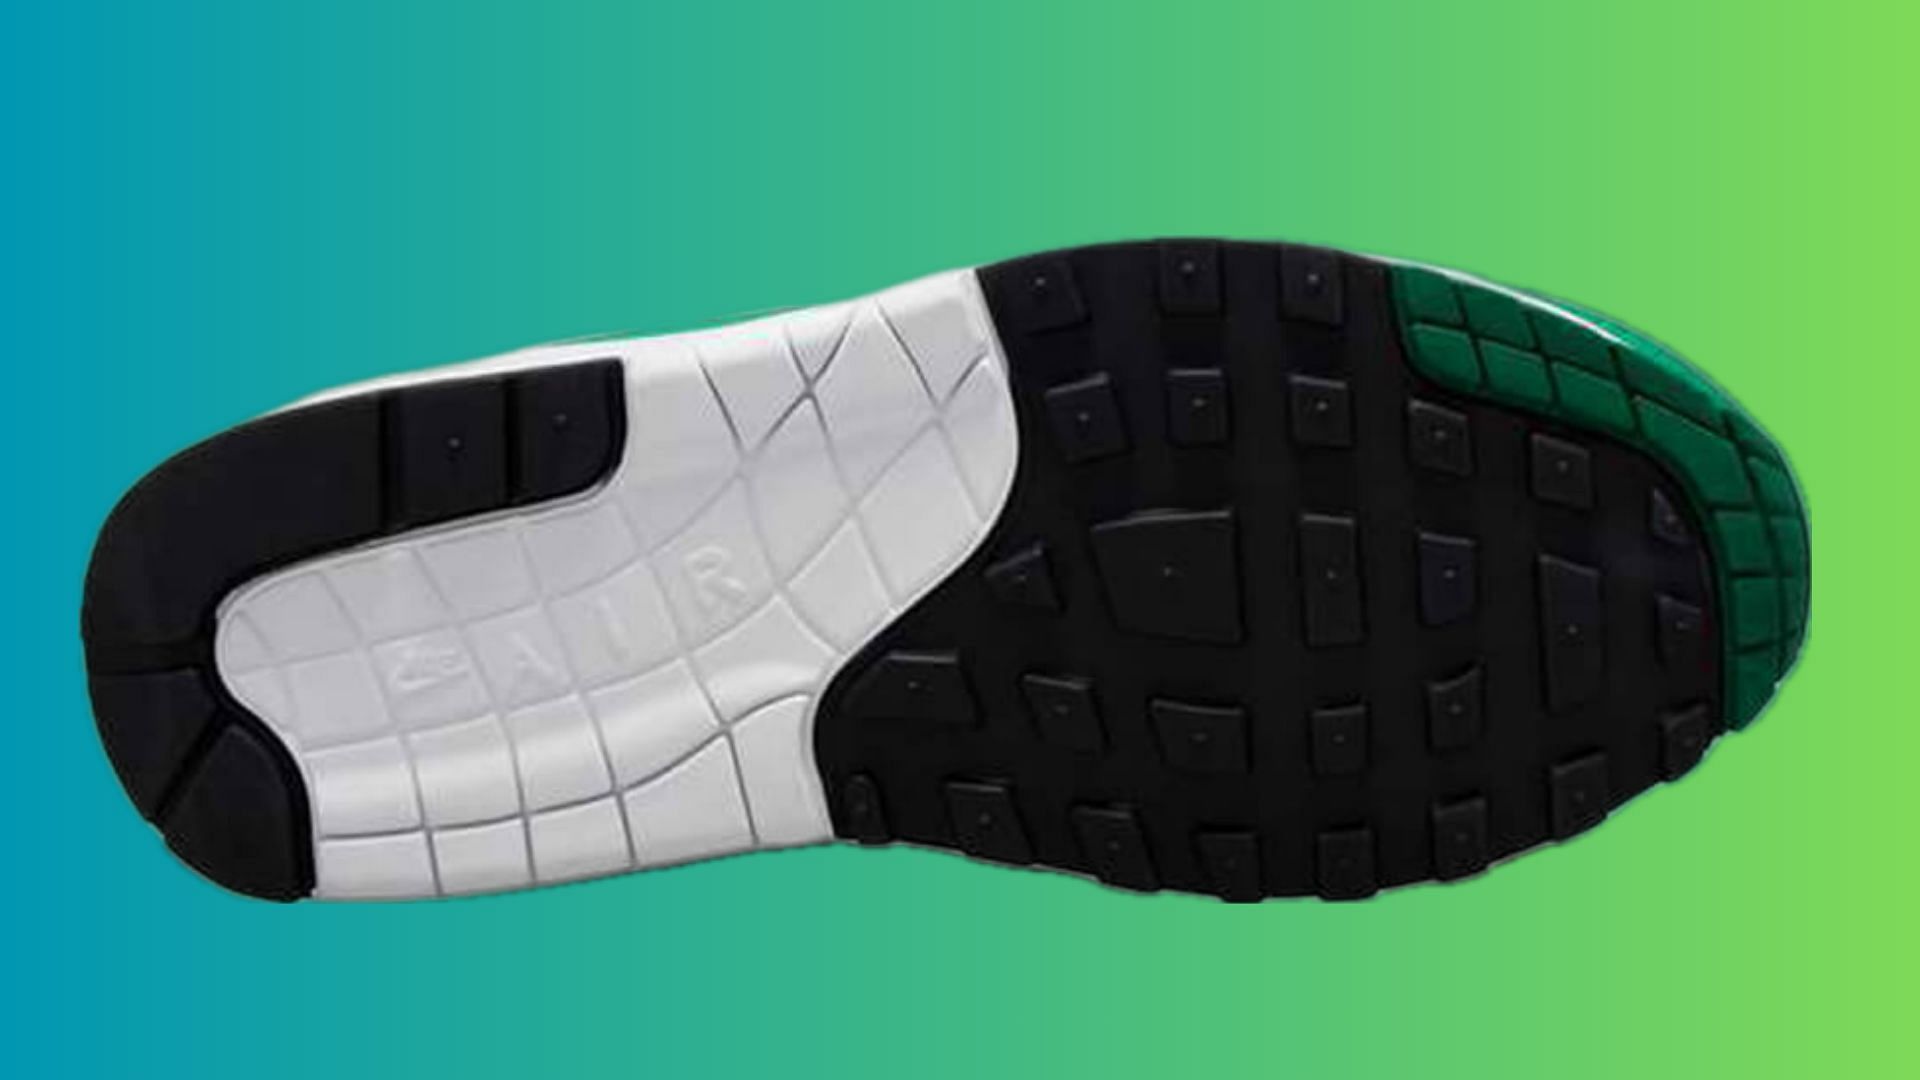 Take a closer look at the outsole of the sneaker (Image via Nike)